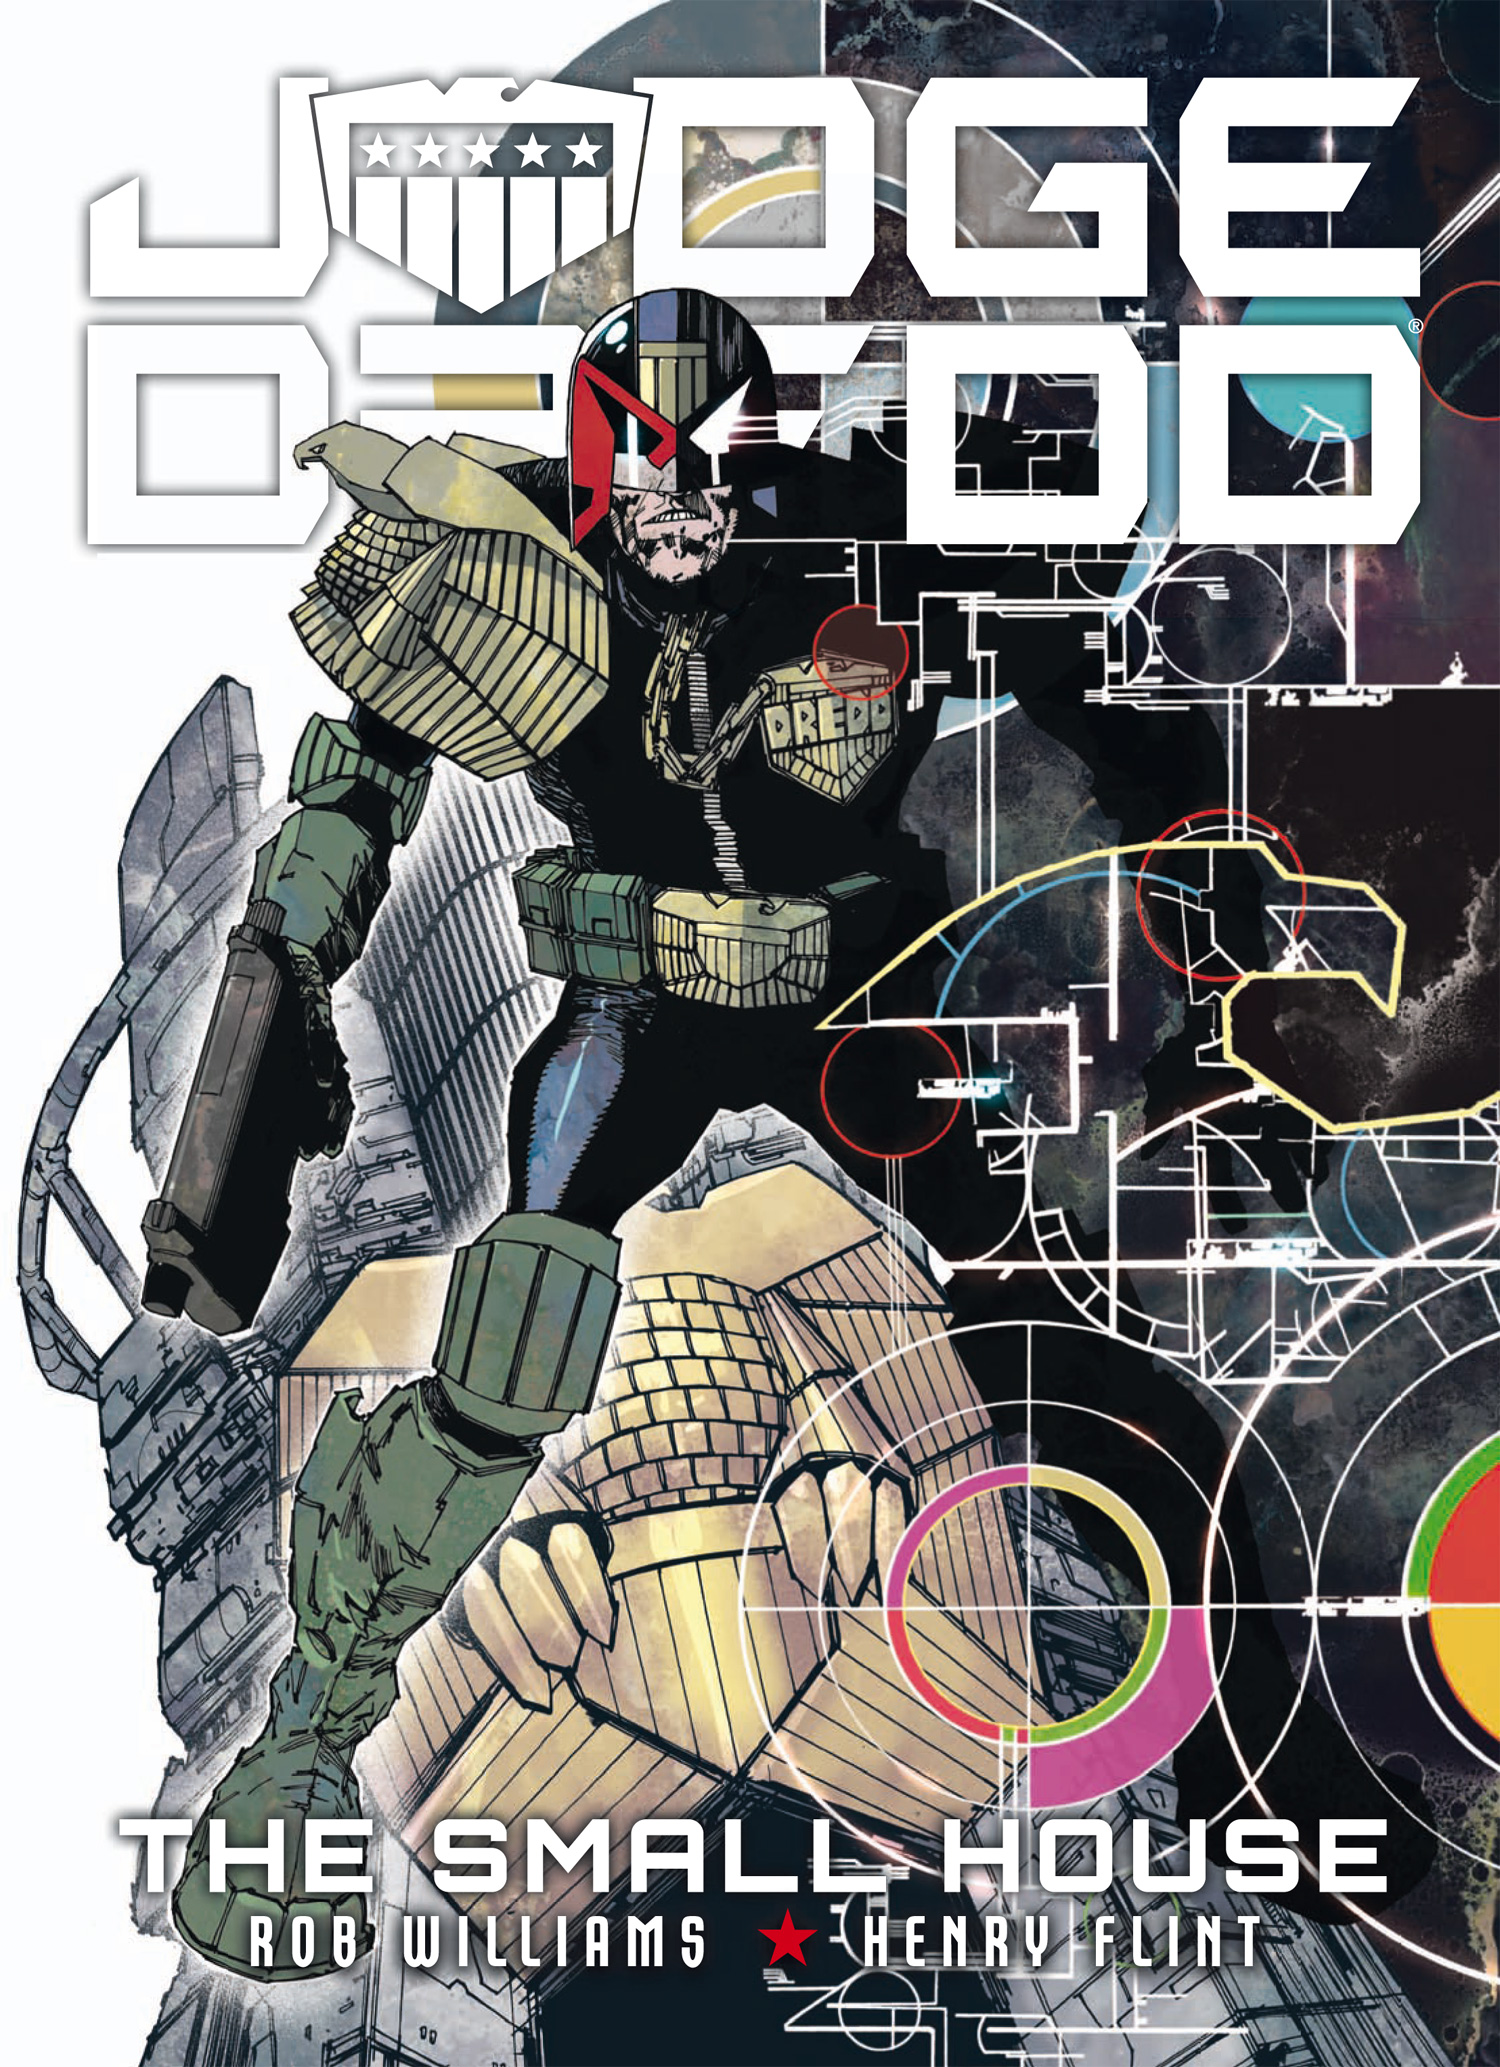 Judge Dredd: The Small House - Final Cover